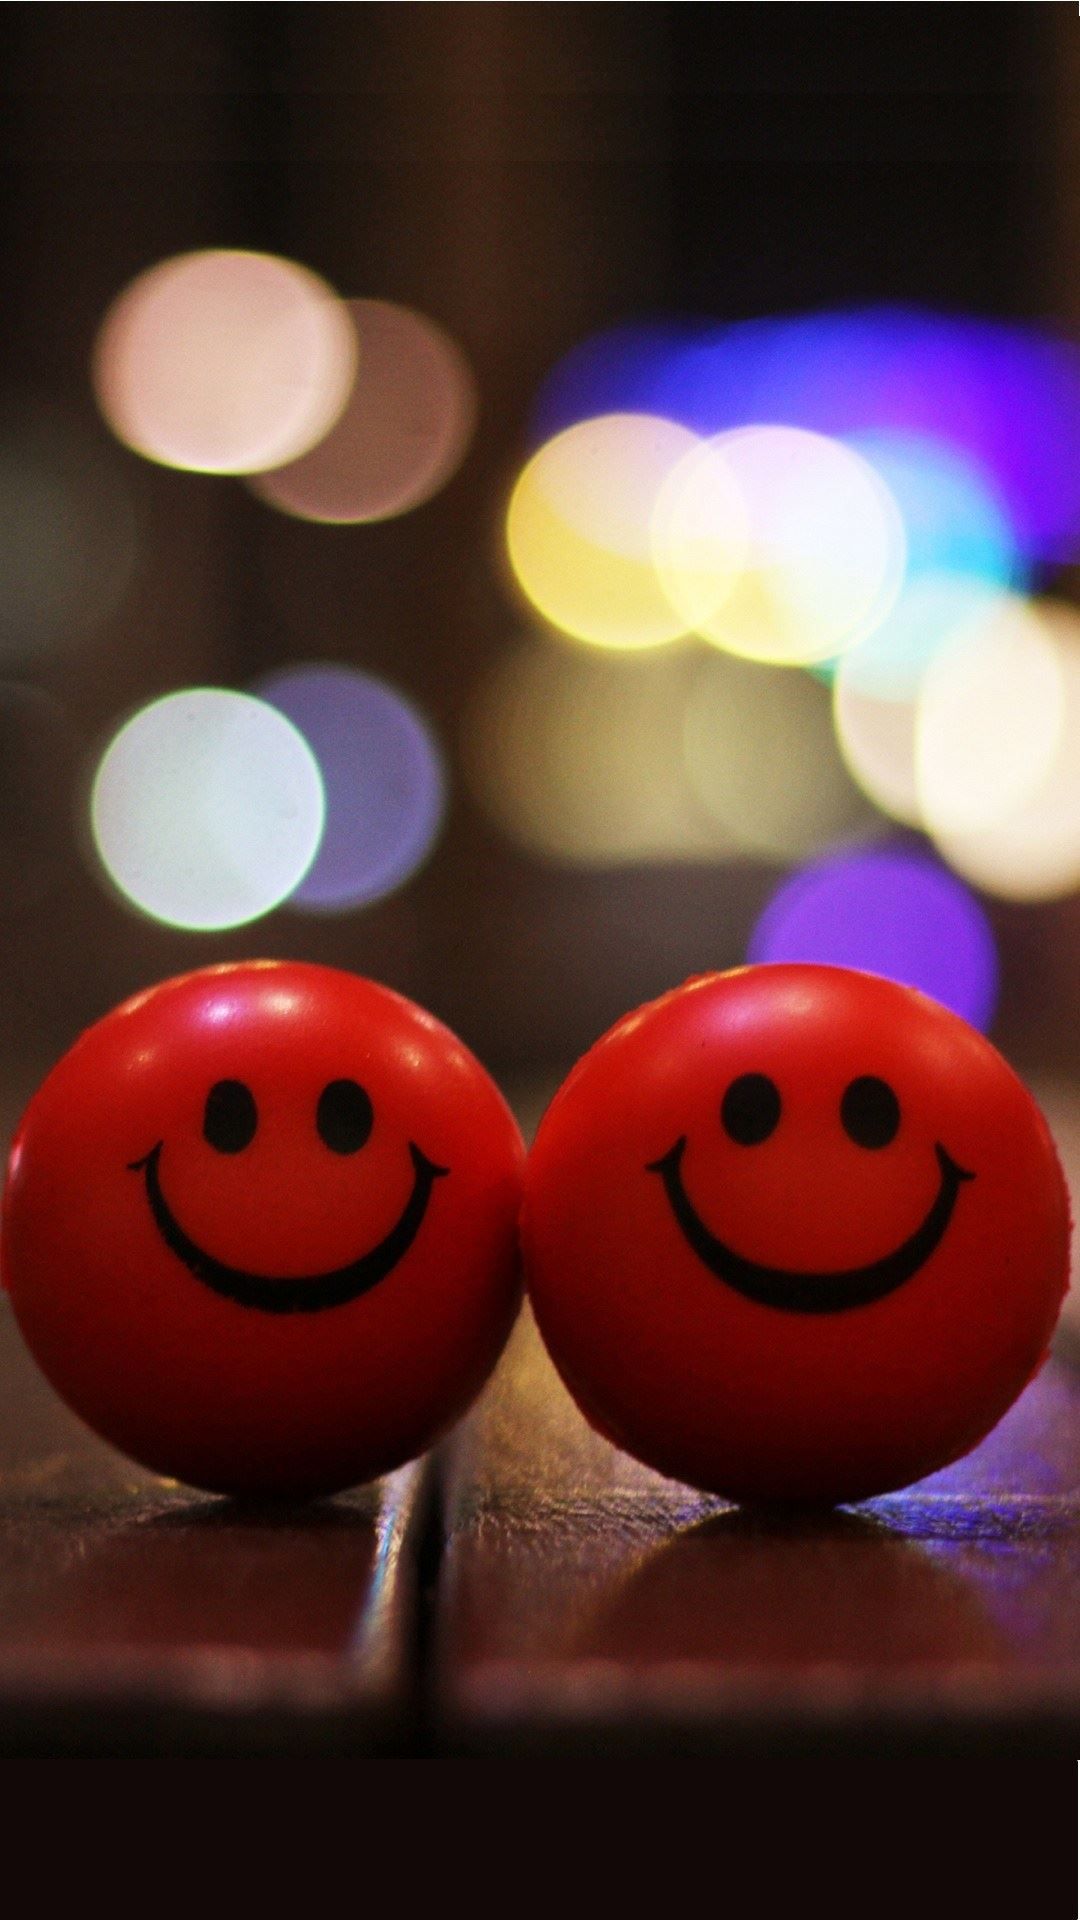 Red Happy Smiley Android Wallpaper free download